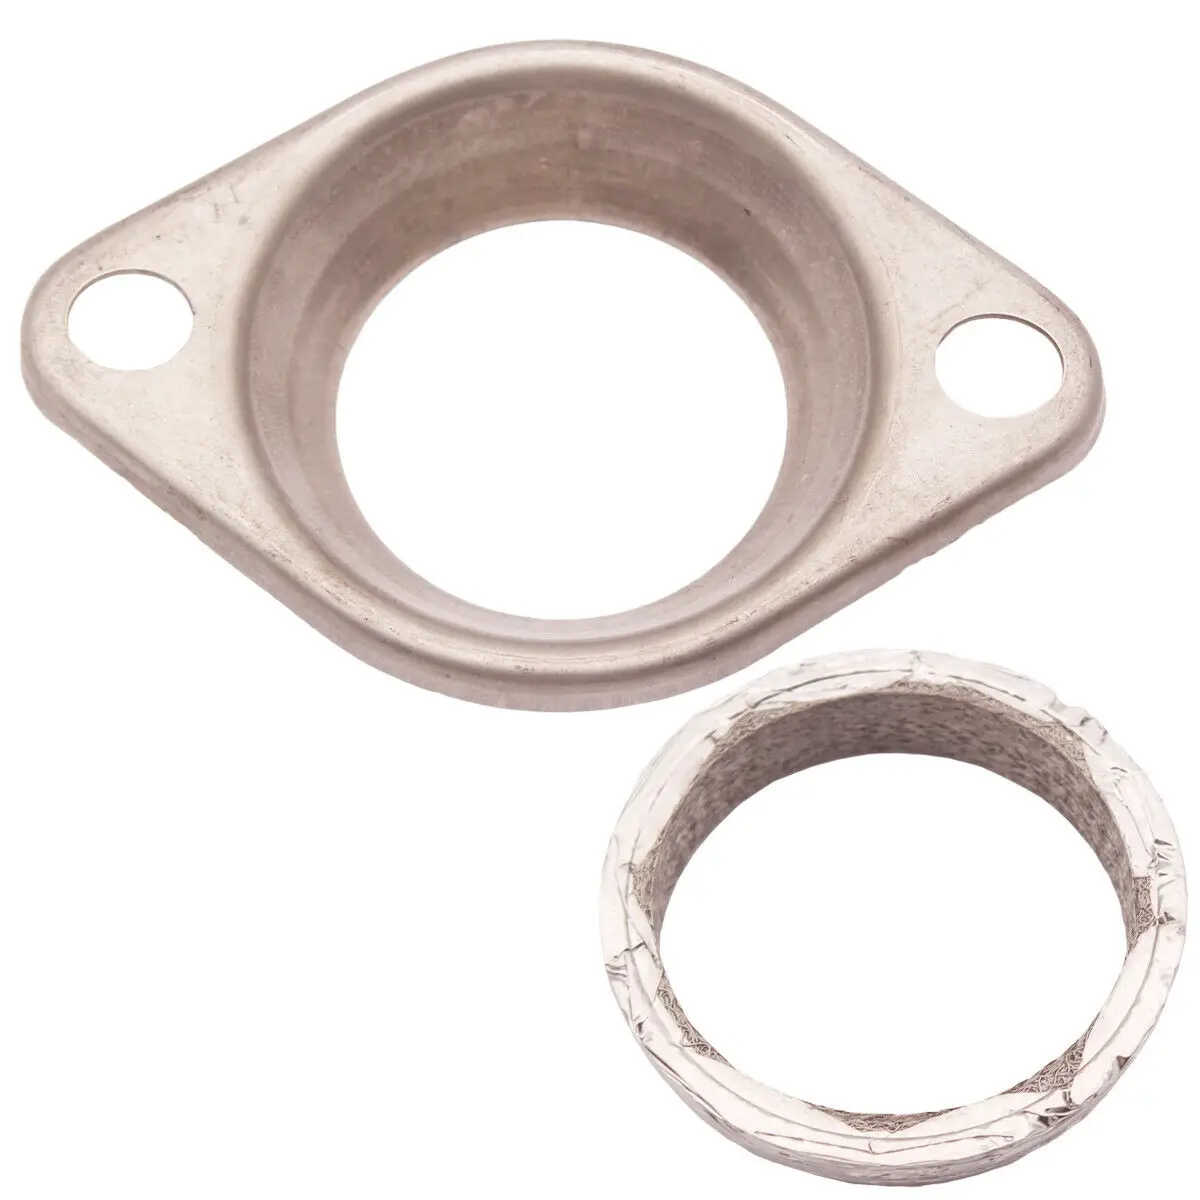 P Prettyia REPLACEMENT 2.5 FLANGE GASKET DONUT EXHAUST for JDM Acura 